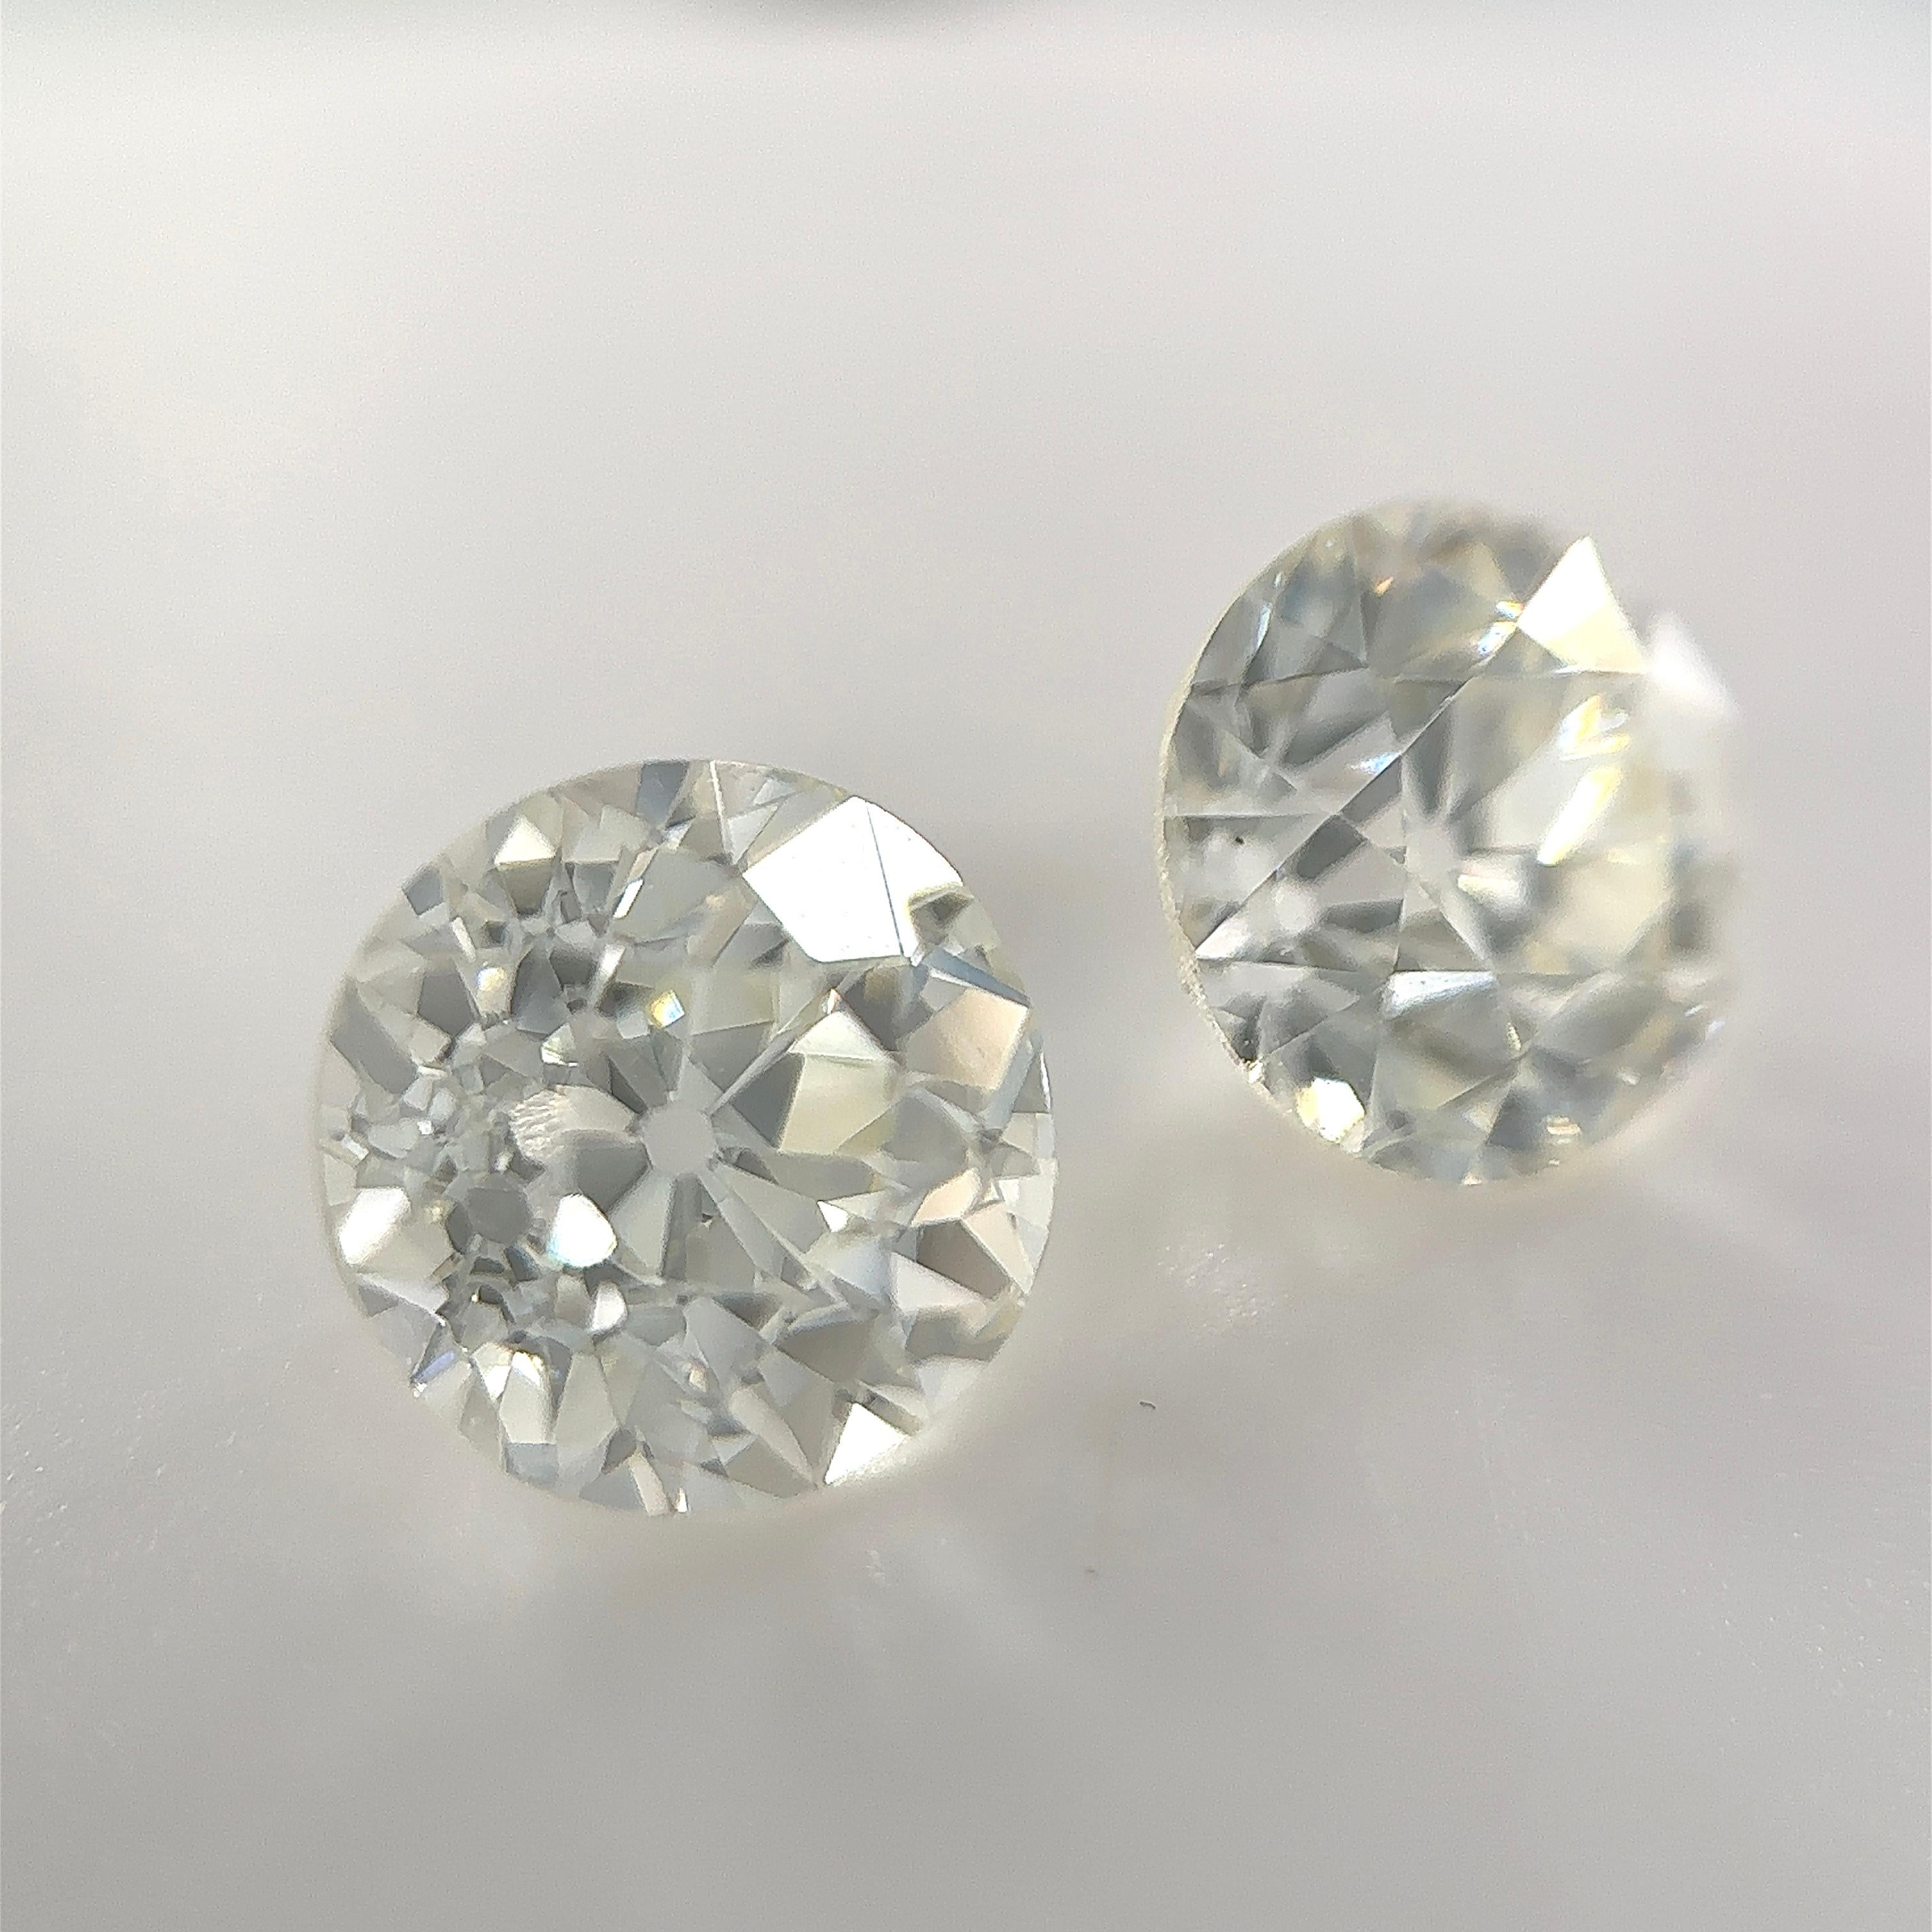 GIA Certified 1.79+1.79 Carat Old Cut Natural Diamonds (Customization Option Available)

I. Old European brilliant cut diamond
GIA Certified, 1.79 Carat, J, VS1 

II. Old European brilliant cut diamond
GIA Certified, 1.79 Carat, L, VS2 

ABOUT